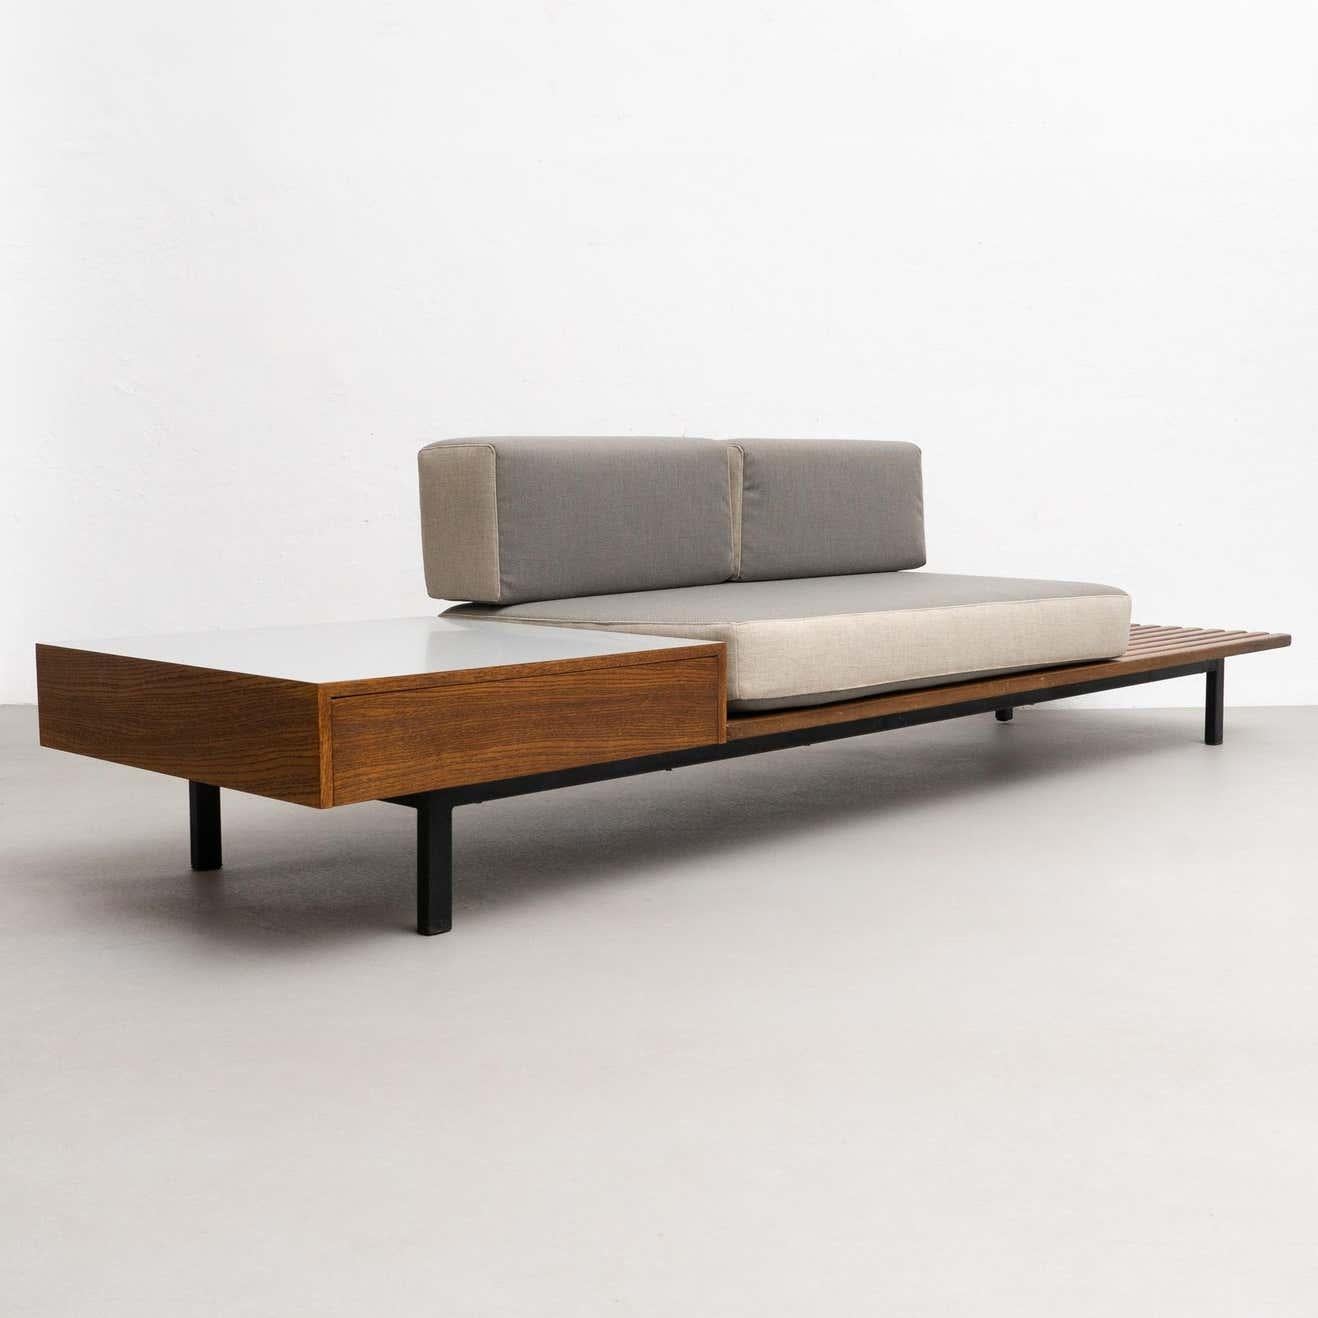 Charlotte Perriand Cansado Bench with a Drawer, circa 1958 For Sale 7